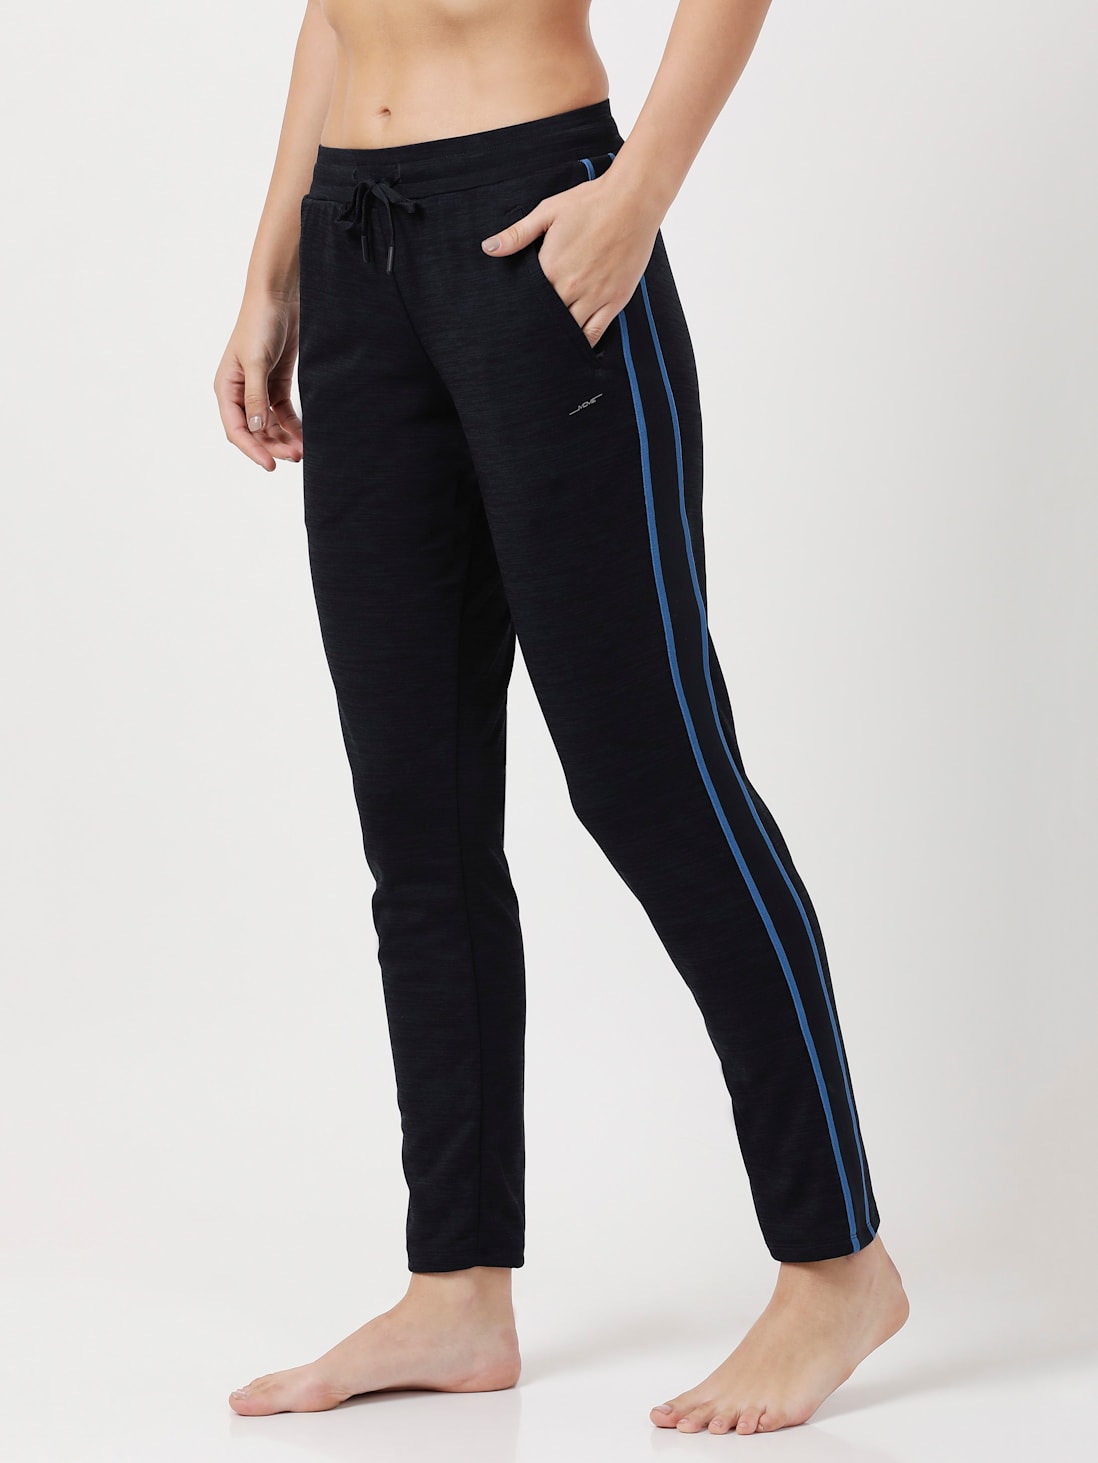 Only Play sweat pants Ladies Jersey Jogging Bottoms Trousers Pants | eBay